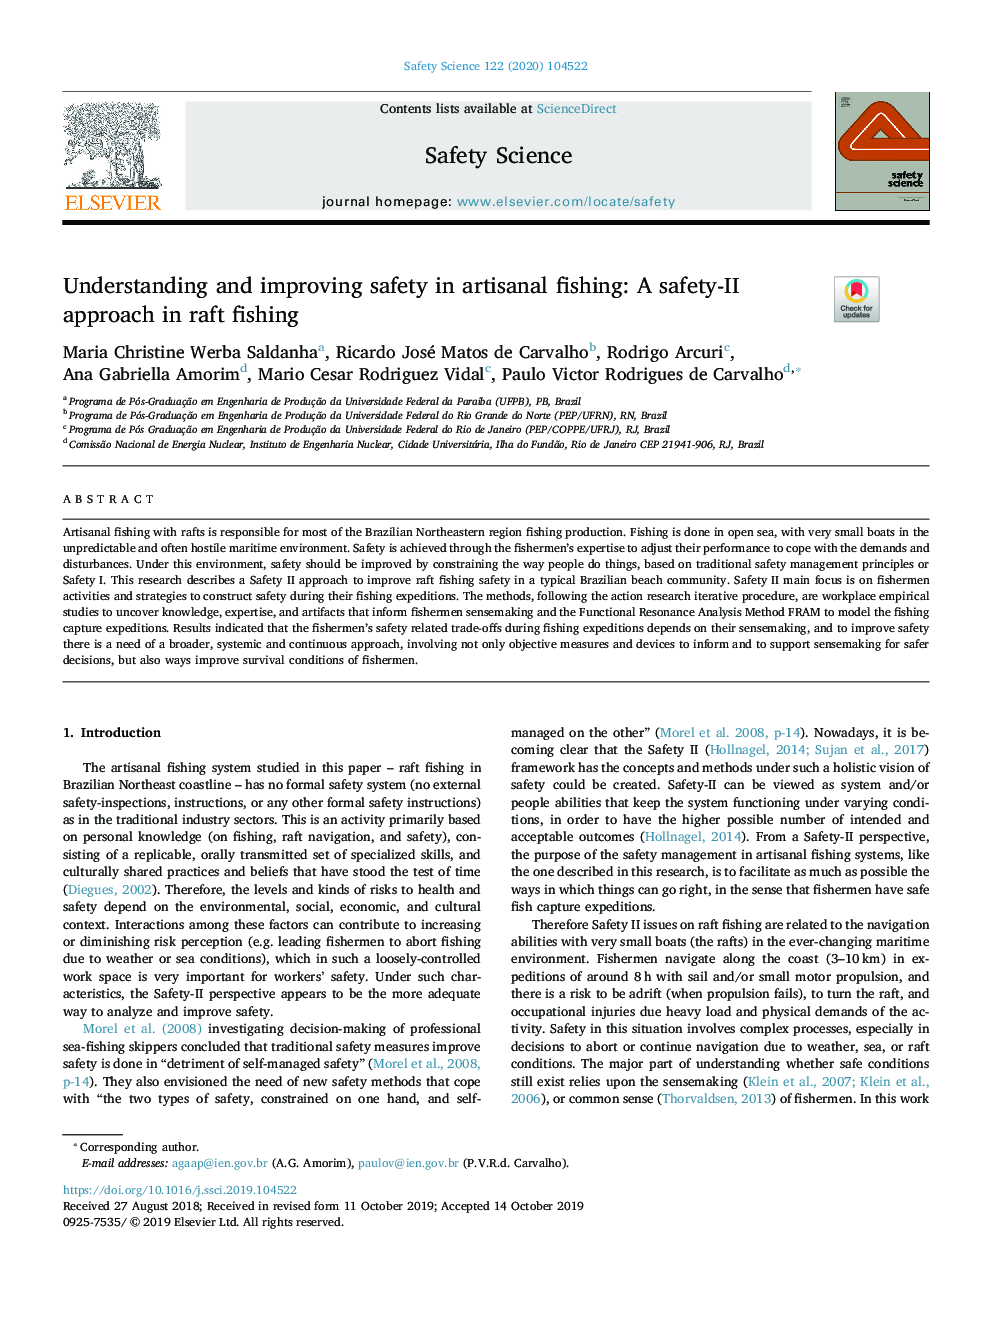 Understanding and improving safety in artisanal fishing: A safety-II approach in raft fishing